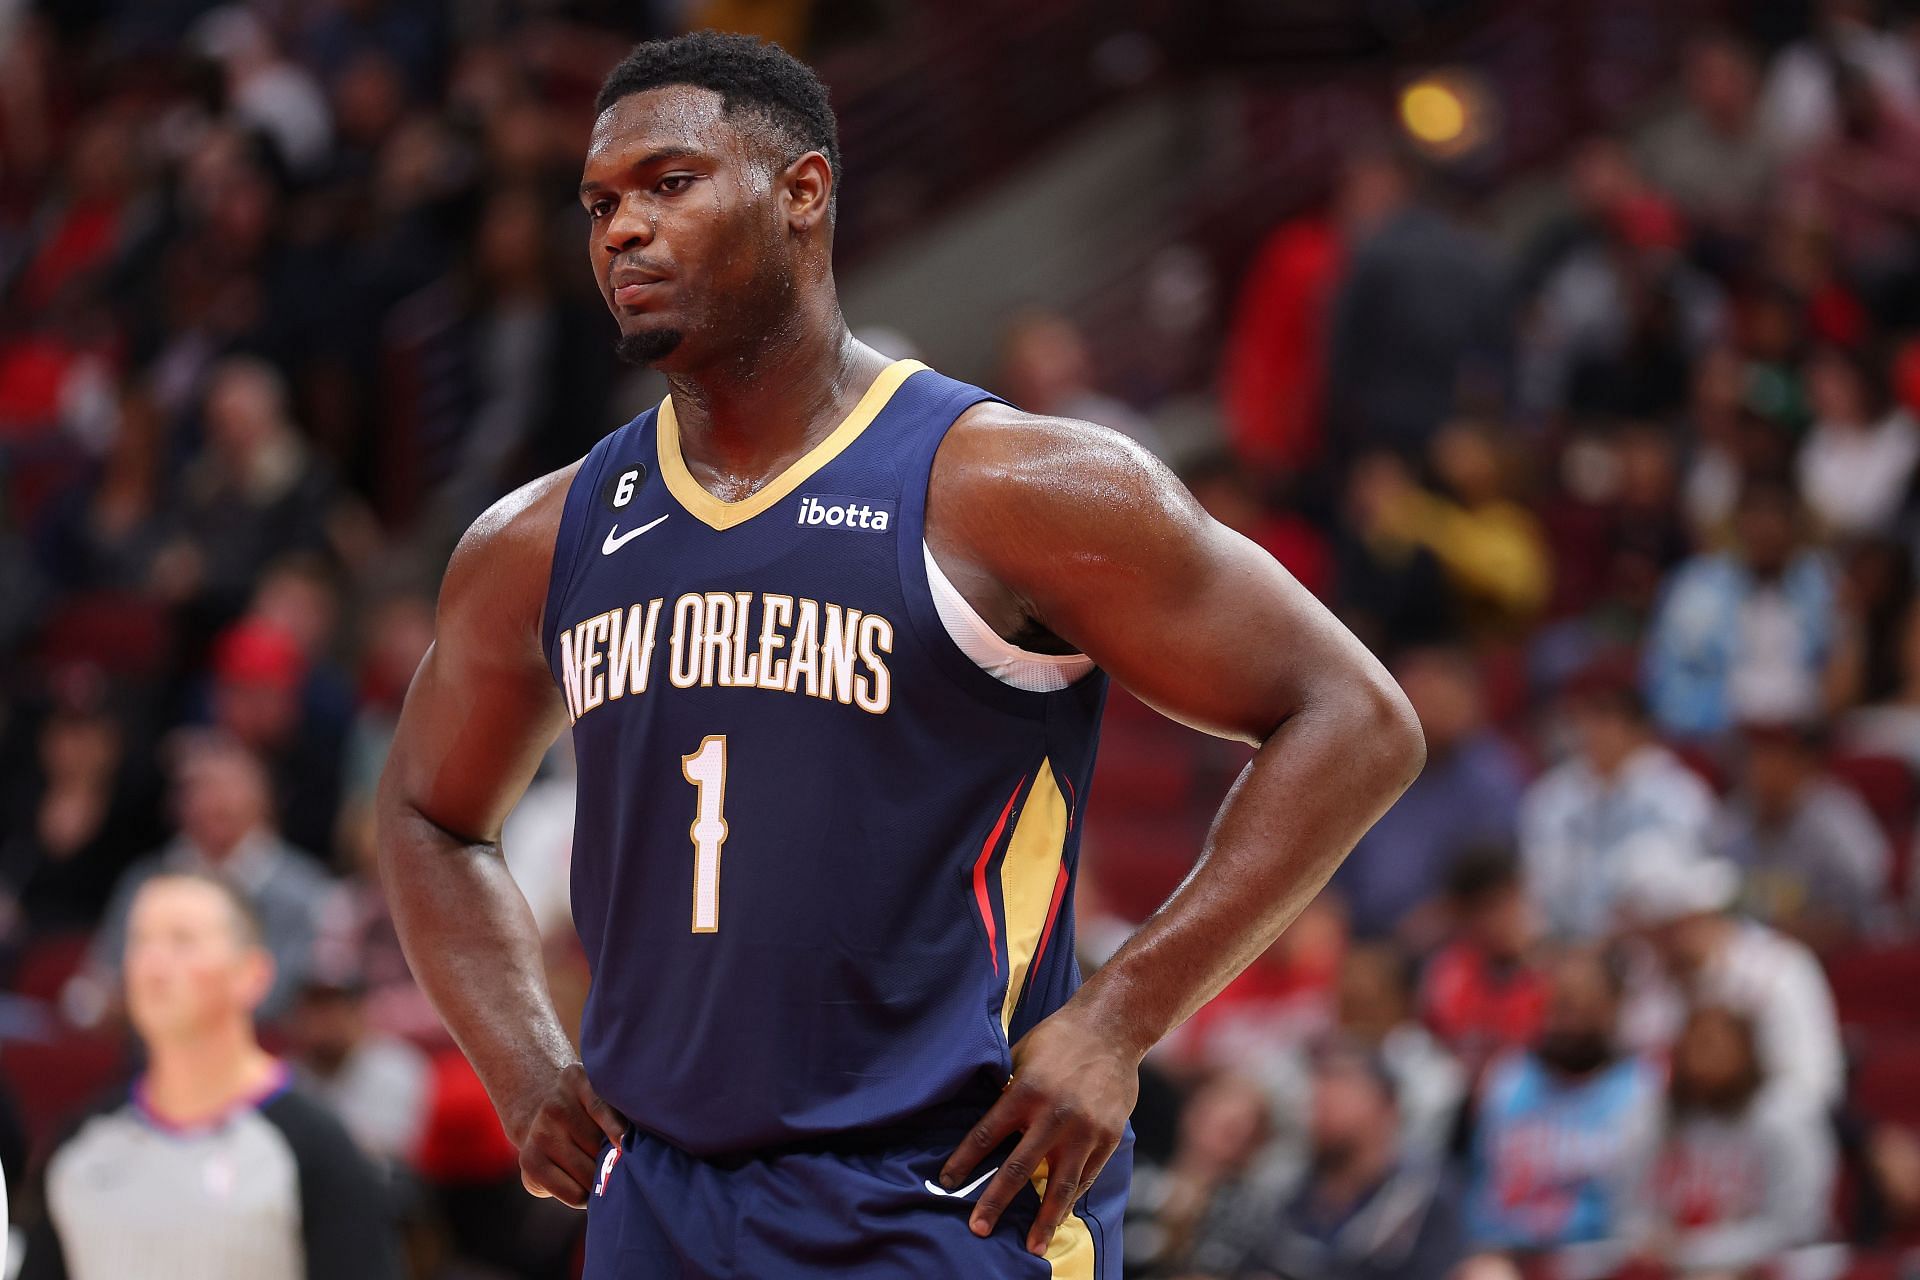 Zion Williamson seems to be ready to dominate the NBA once again (Image via Getty Images)